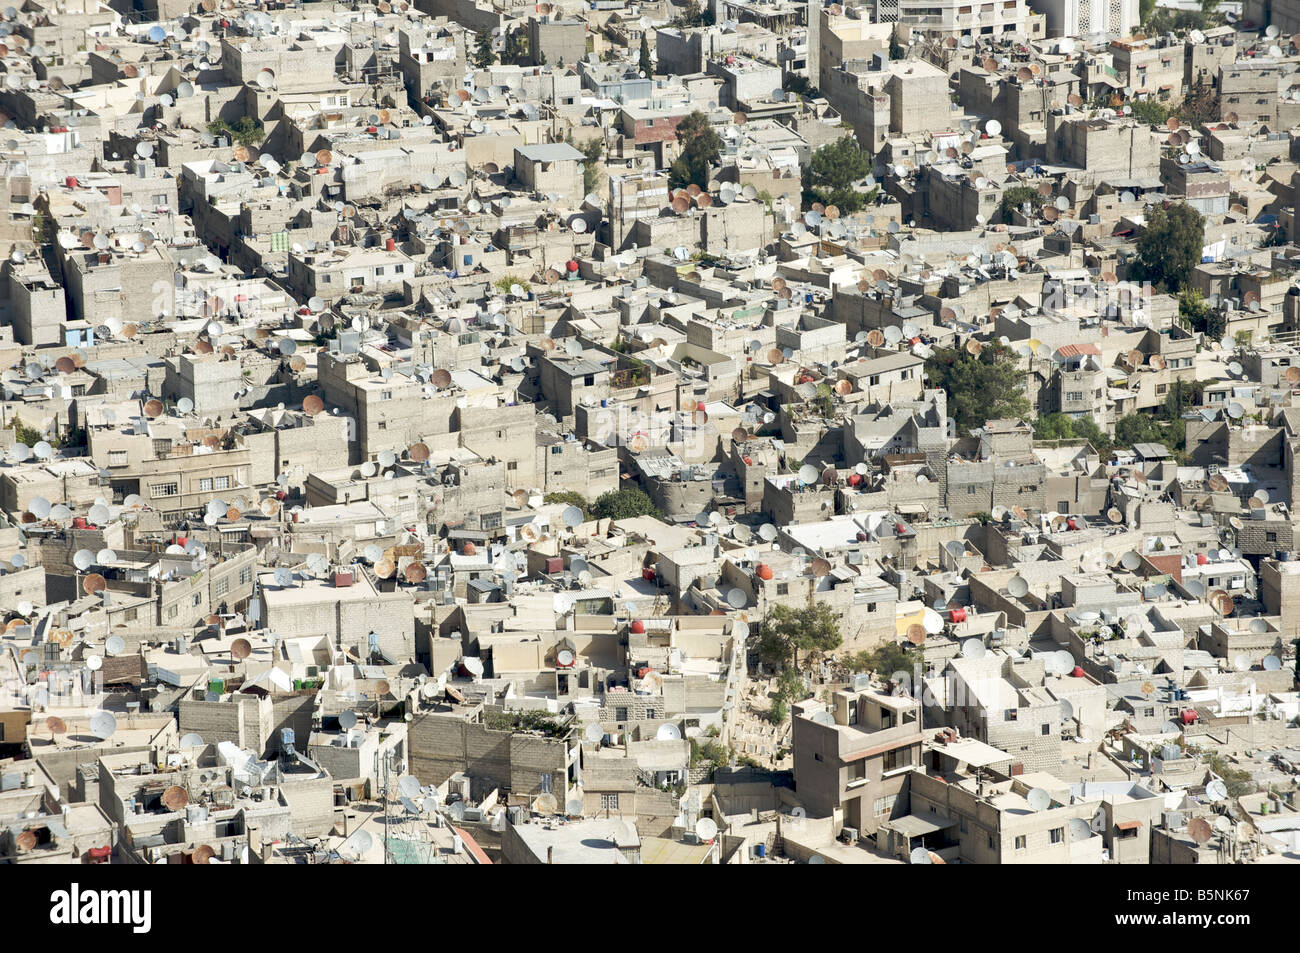 Damascus modern city, aerial view Stock Photo